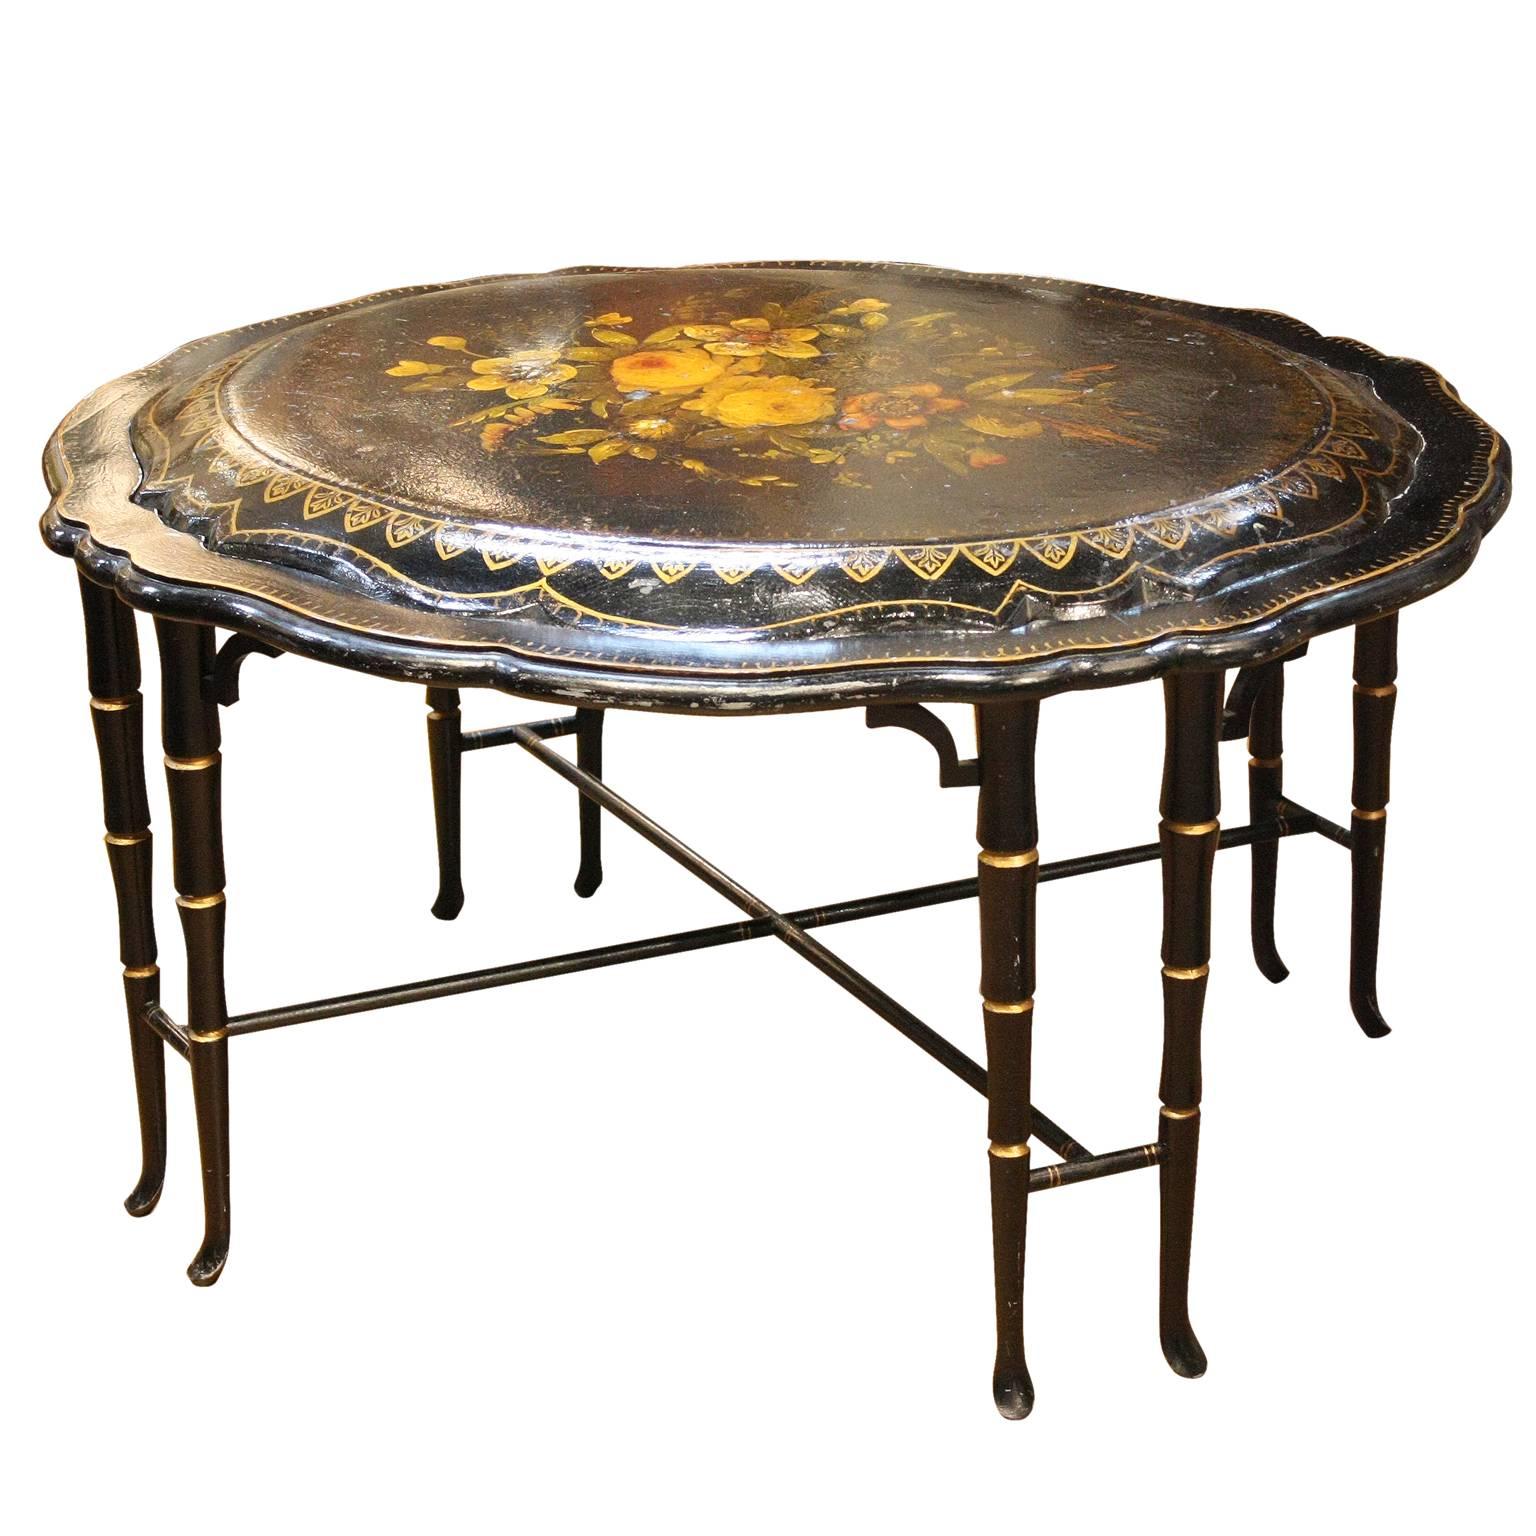 19th century English low table with papier-mâché top.